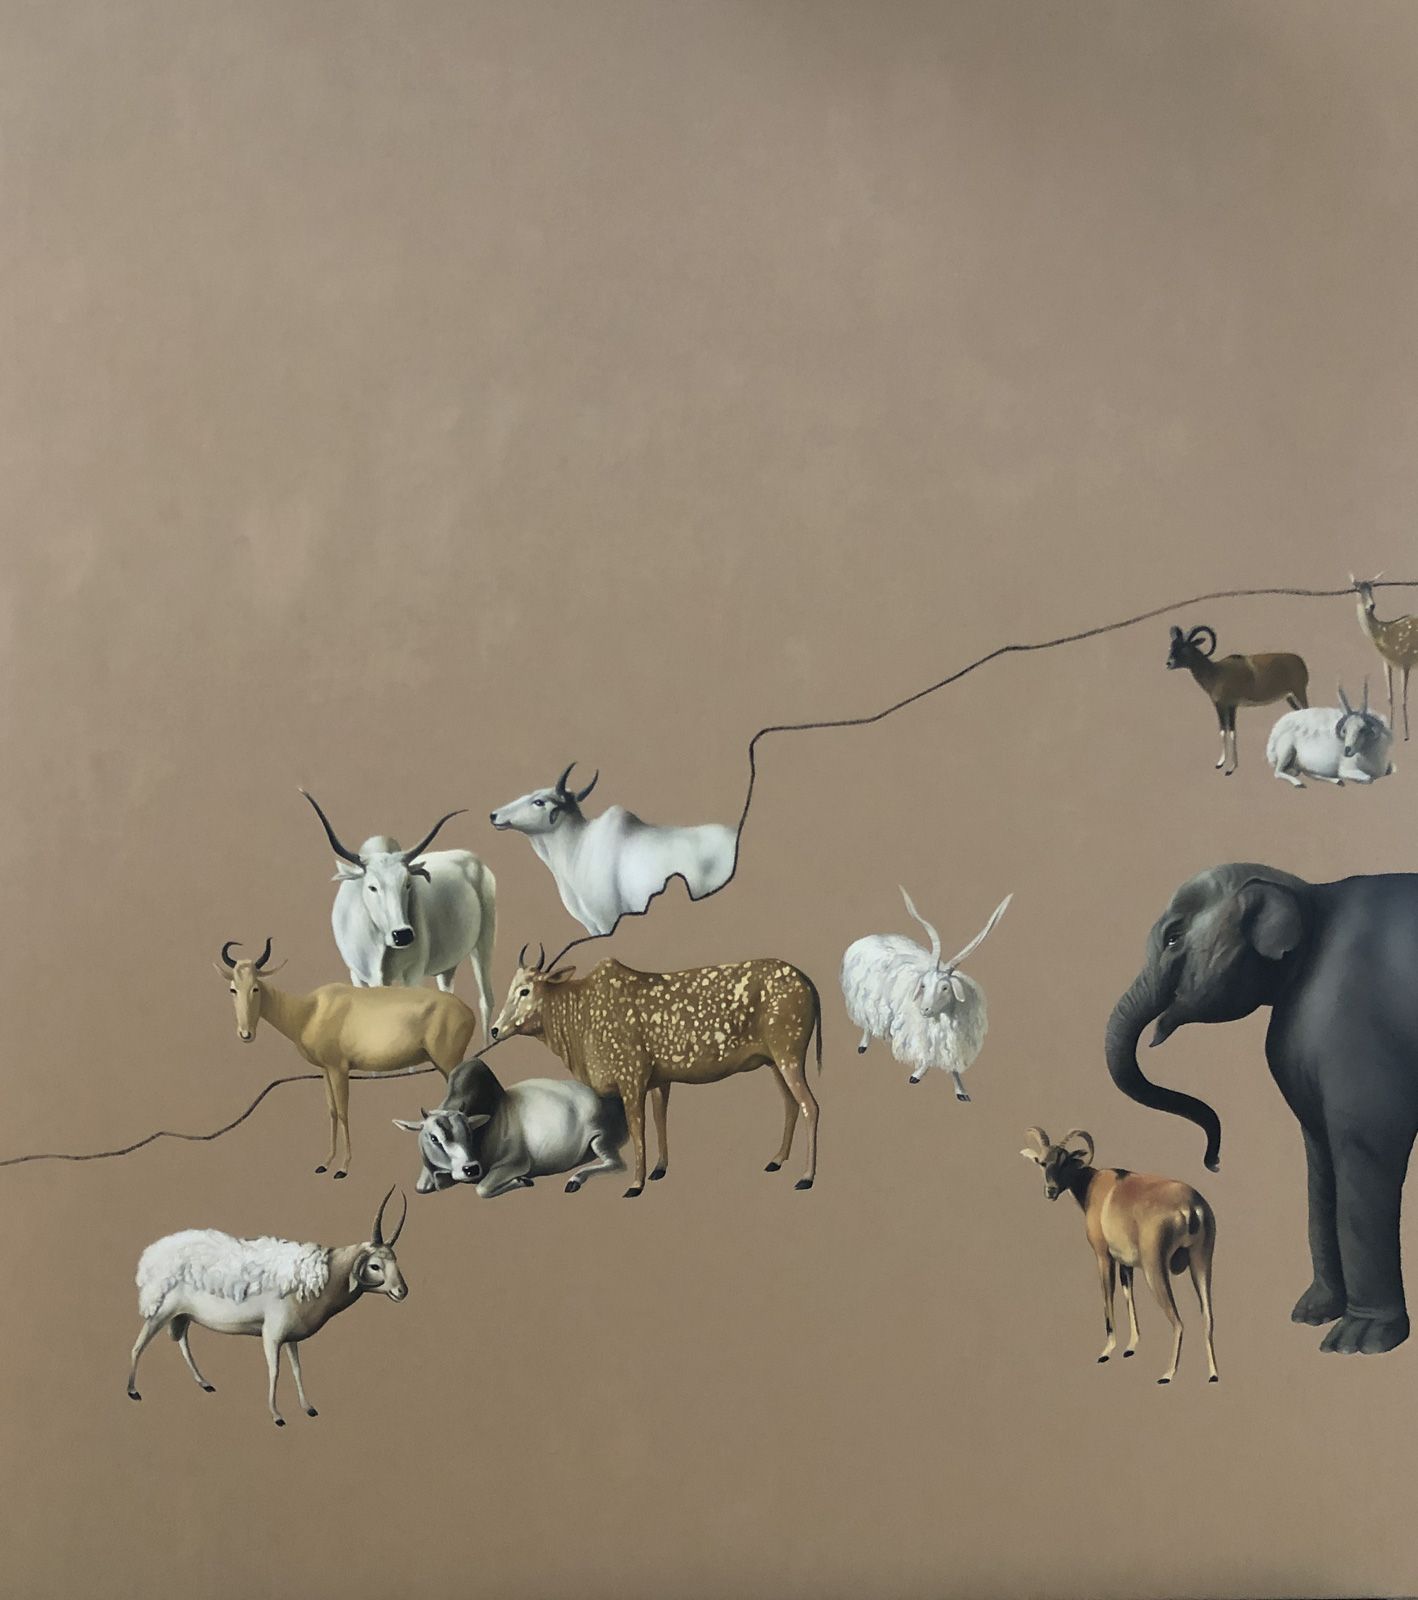 Minimalistic paintings of a group of animals on plain beige background featuring elephants, cows and goats amongst others.